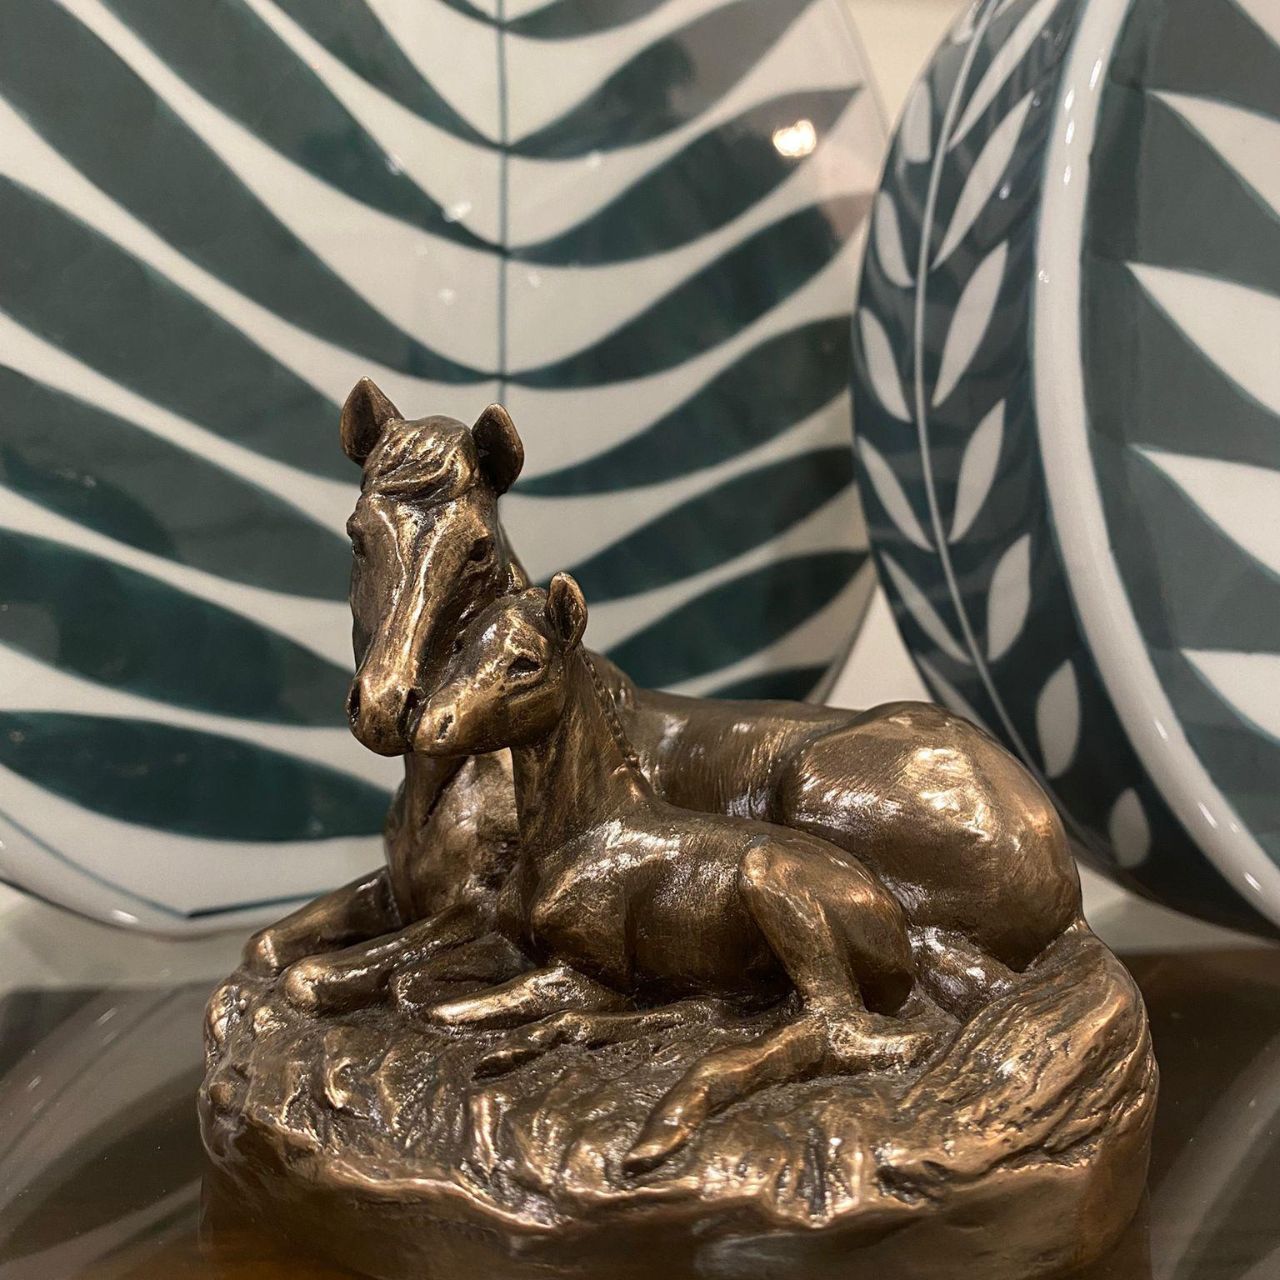 Pony and foal is one of the most popular pieces in the Genesis Collection ideal for a gift or presentation.